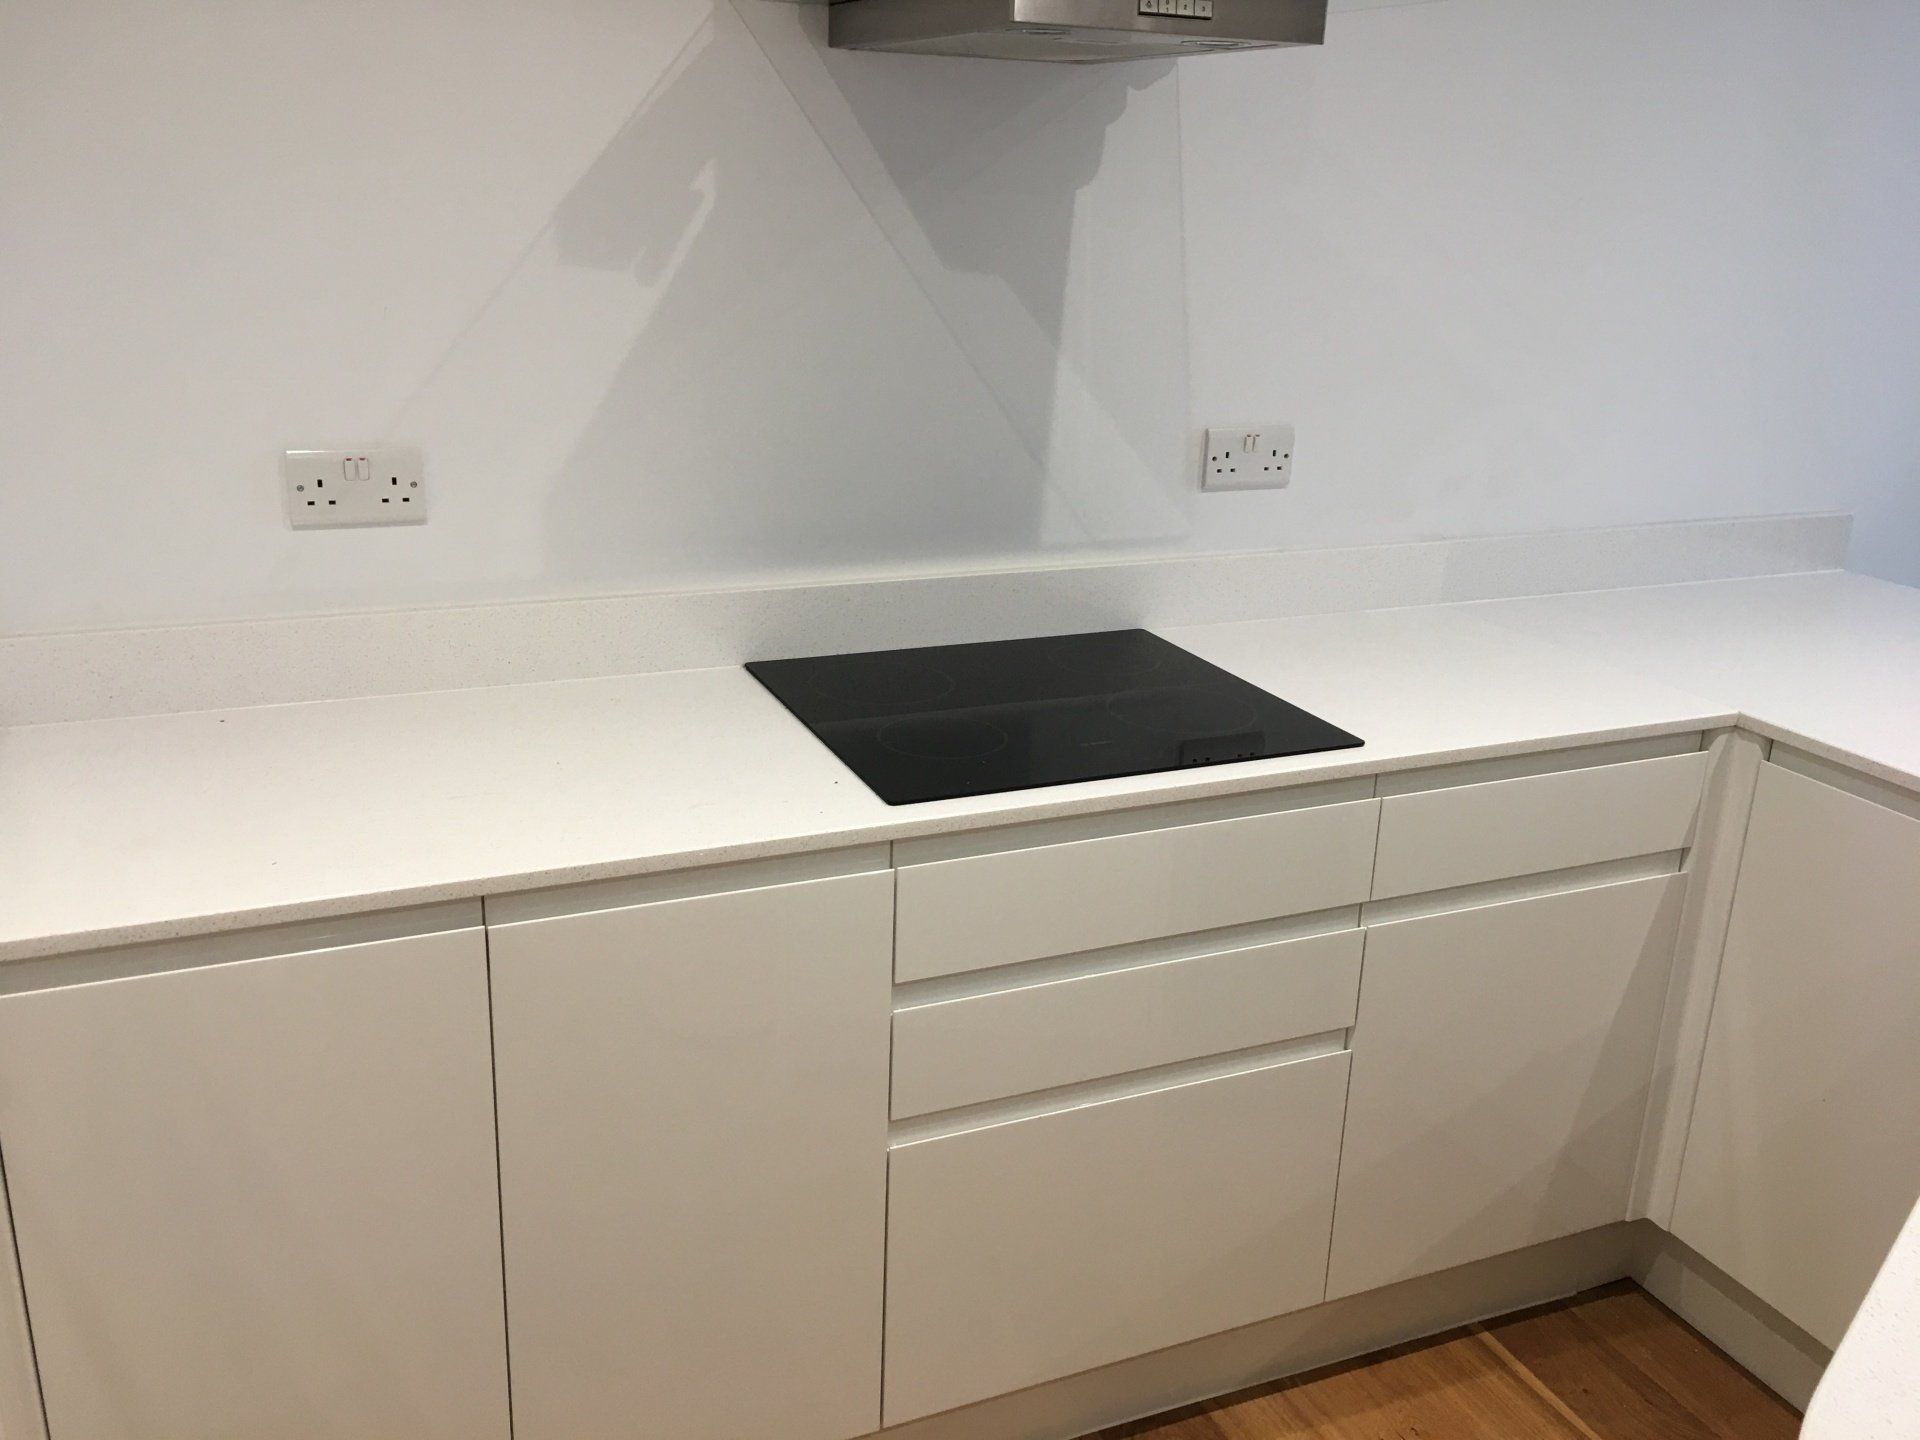 Kitchen fit, crawley down. Builder. Building contractor. Construction. Carpentry. Carpentry contractor. Extensions. New builds. Timber frame fabrication and erection. Design and build. Kitchen installations. Horsham. Surrey. Reigate. Redhill. Dorking. Crawley. West Sussex. Cranleigh.